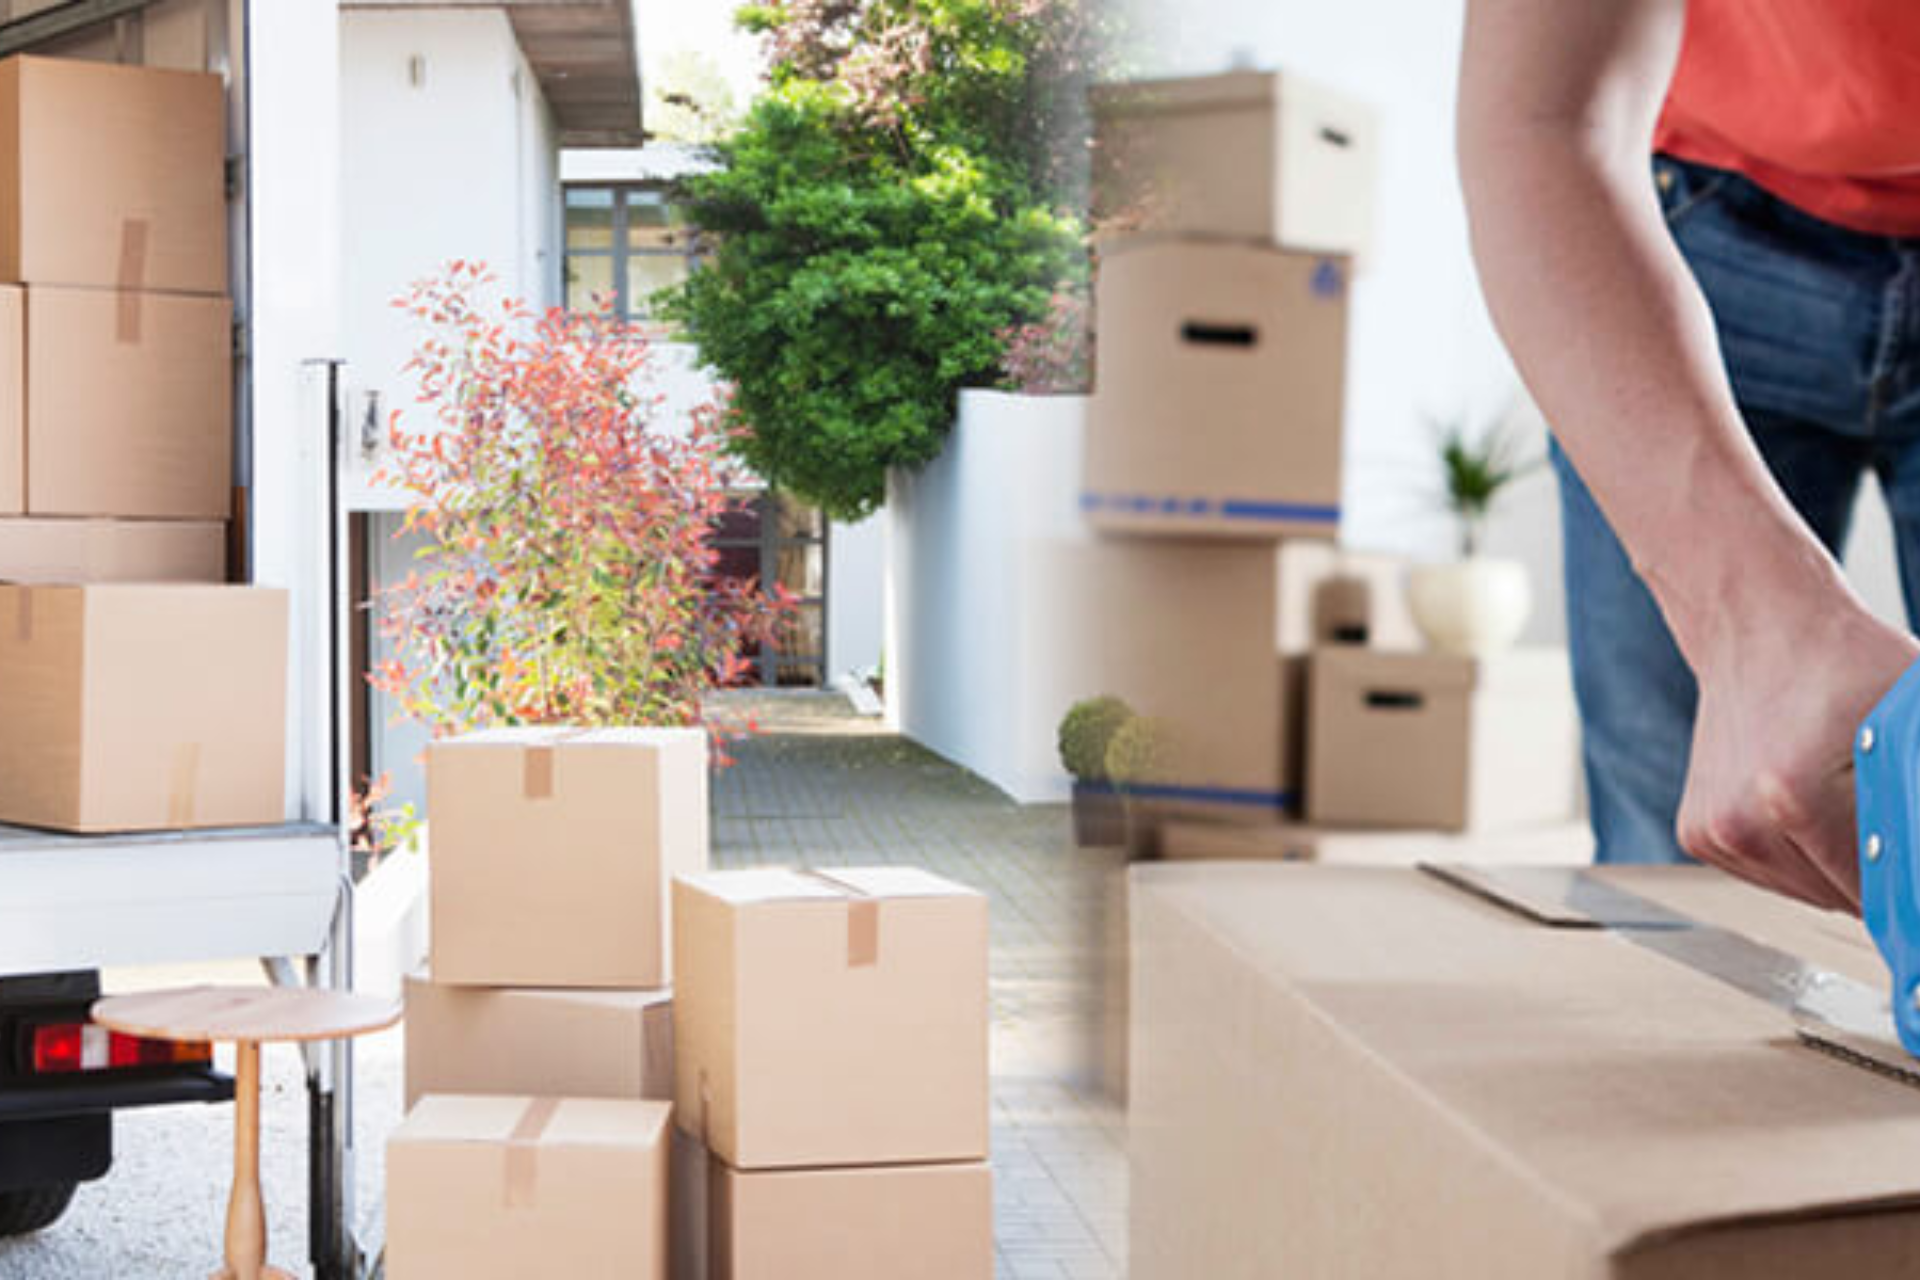 Qualified Packers and Movers – A One-stop Shop for Household Moving